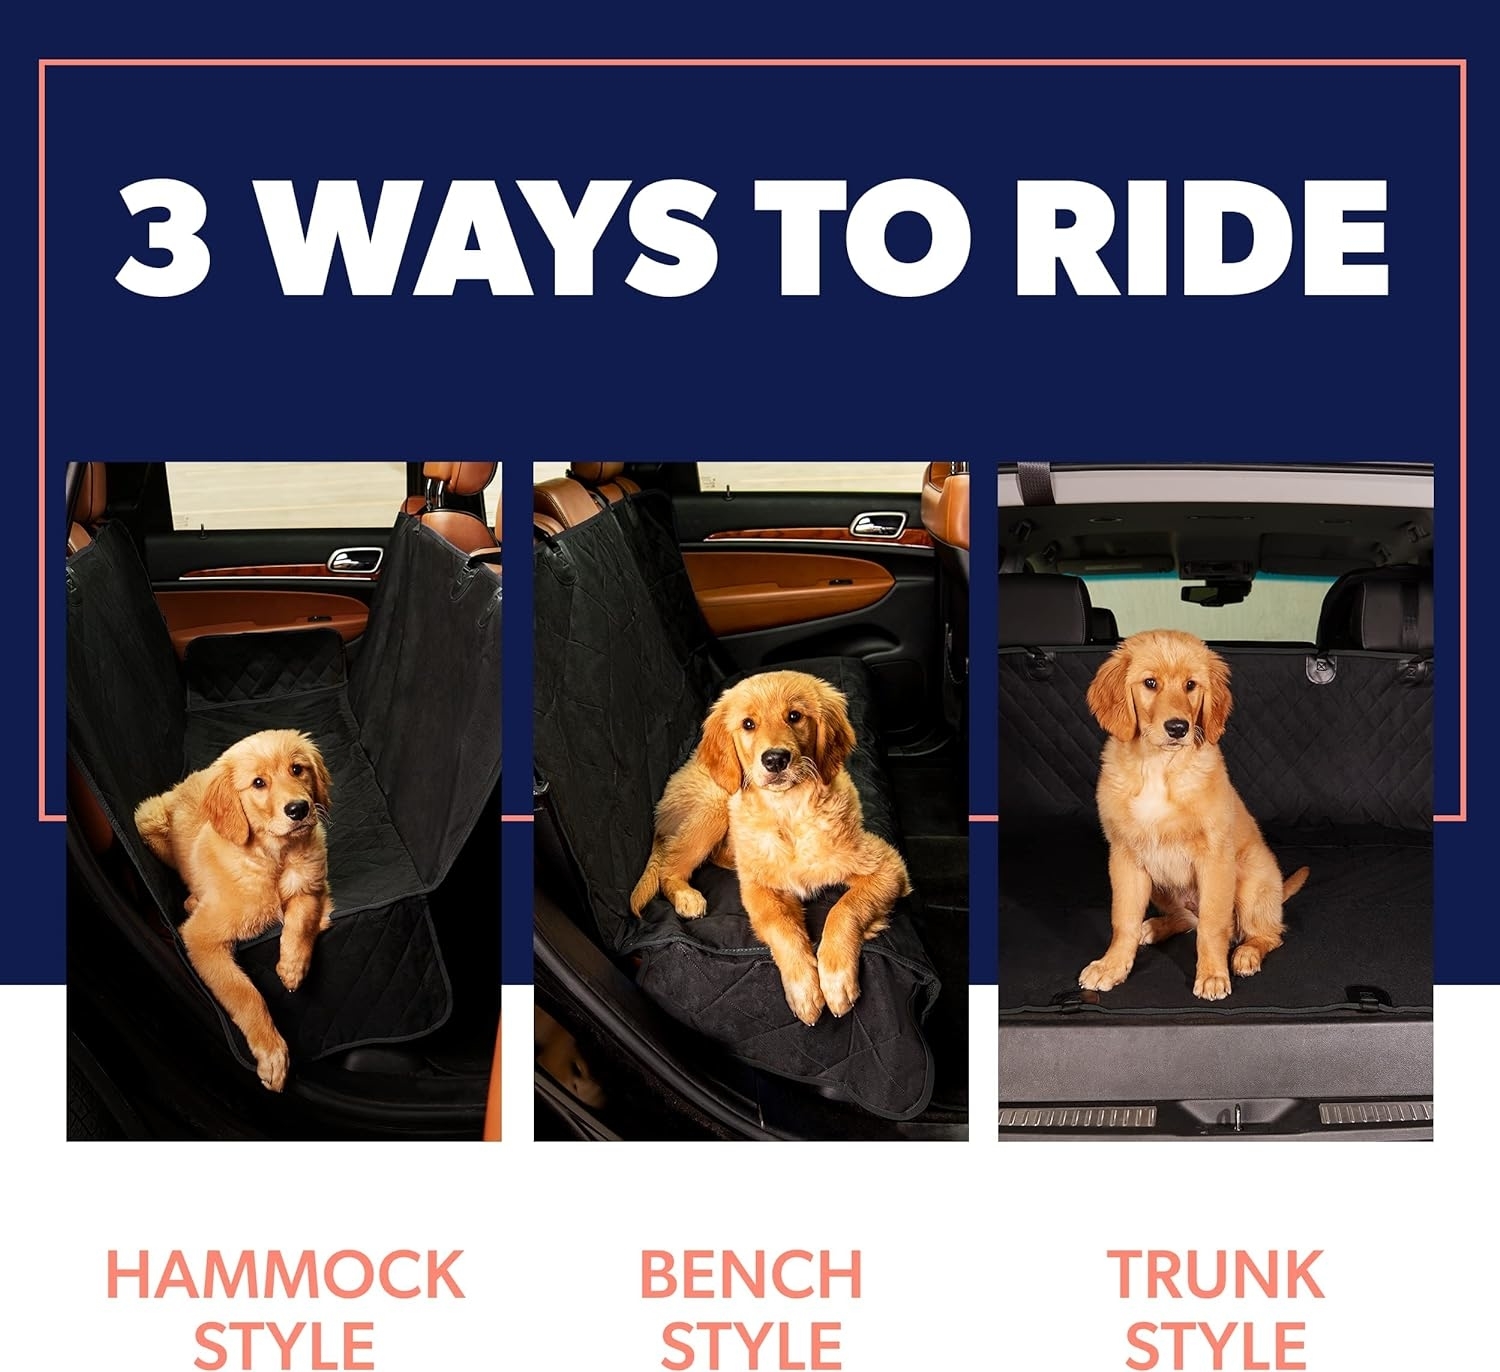 Guide illustrating 3 methods of car travel for dogs: hammock, bench, and trunk styles